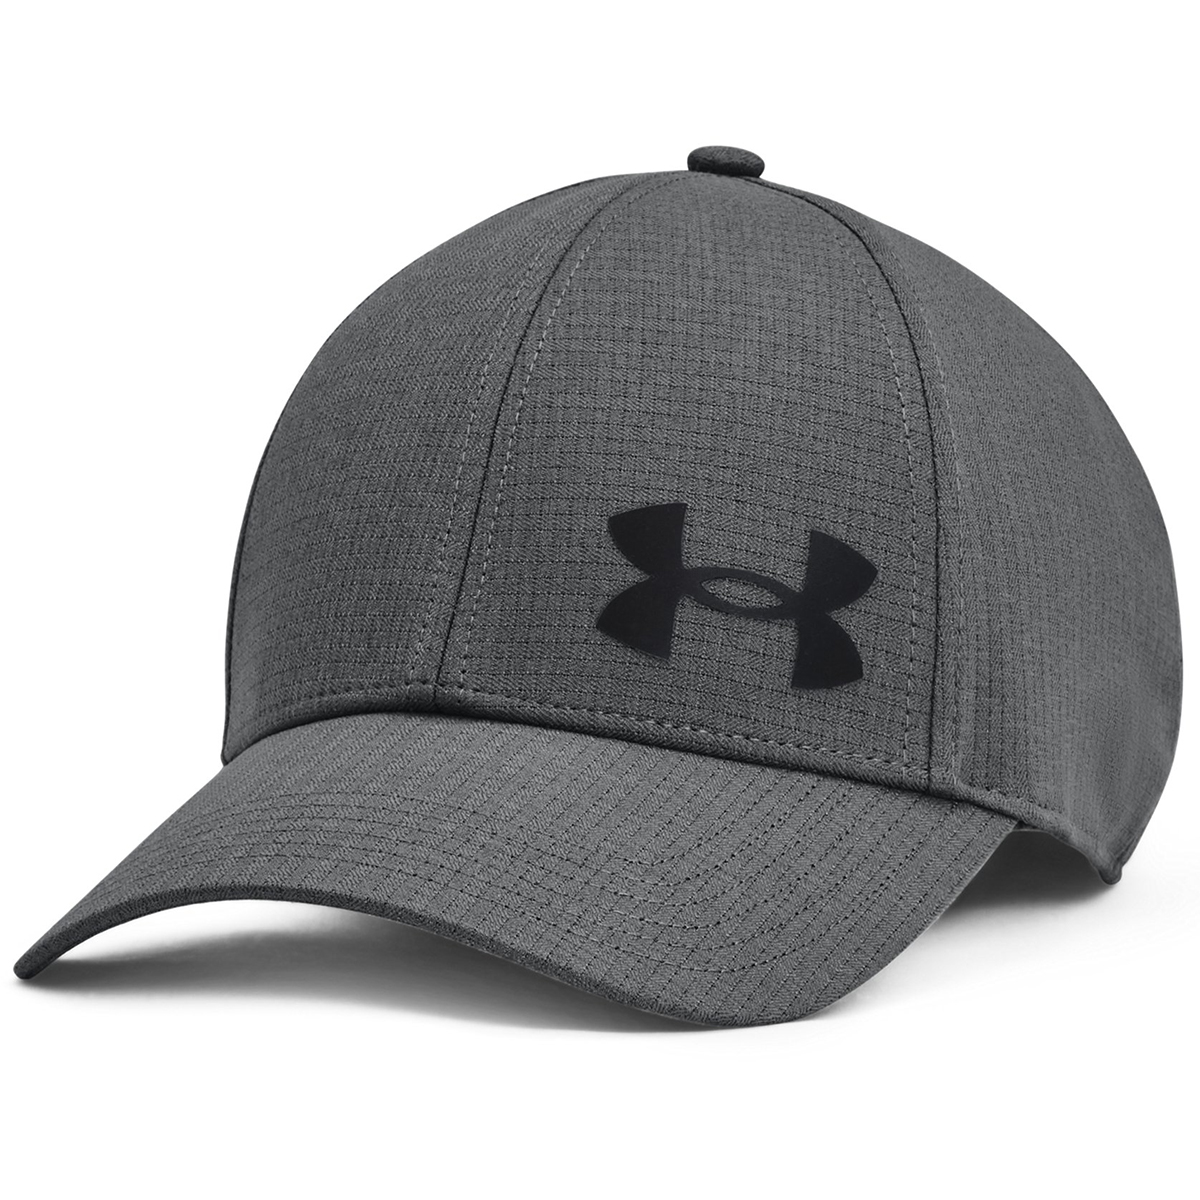 Under Armour Men's Ua Iso-Chill Armourvent Stretch Hat